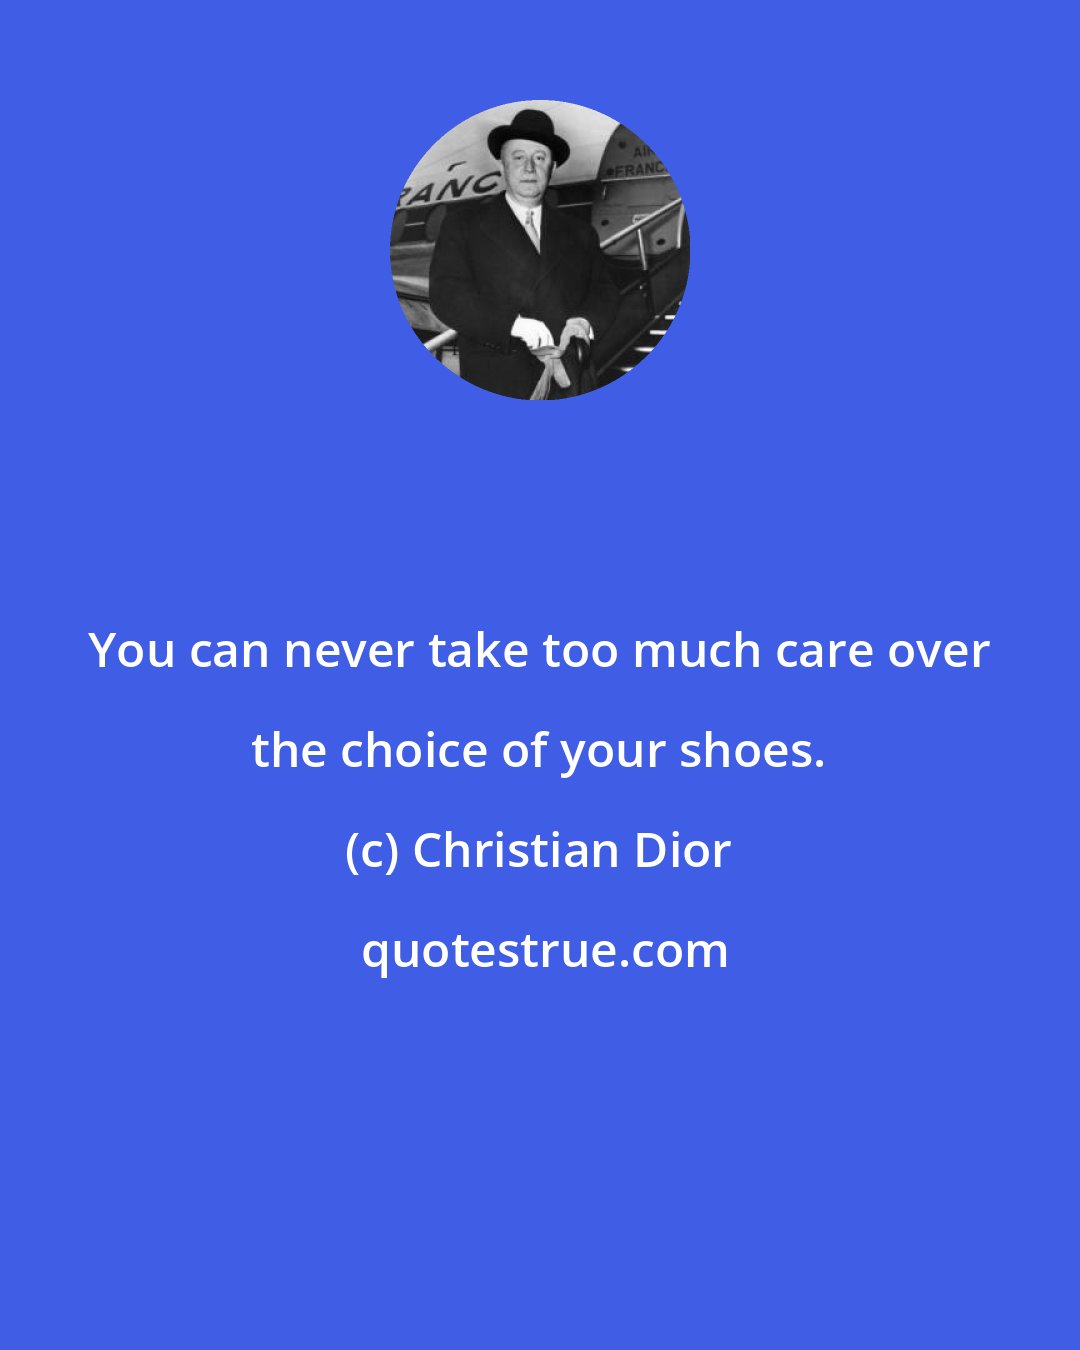 Christian Dior: You can never take too much care over the choice of your shoes.